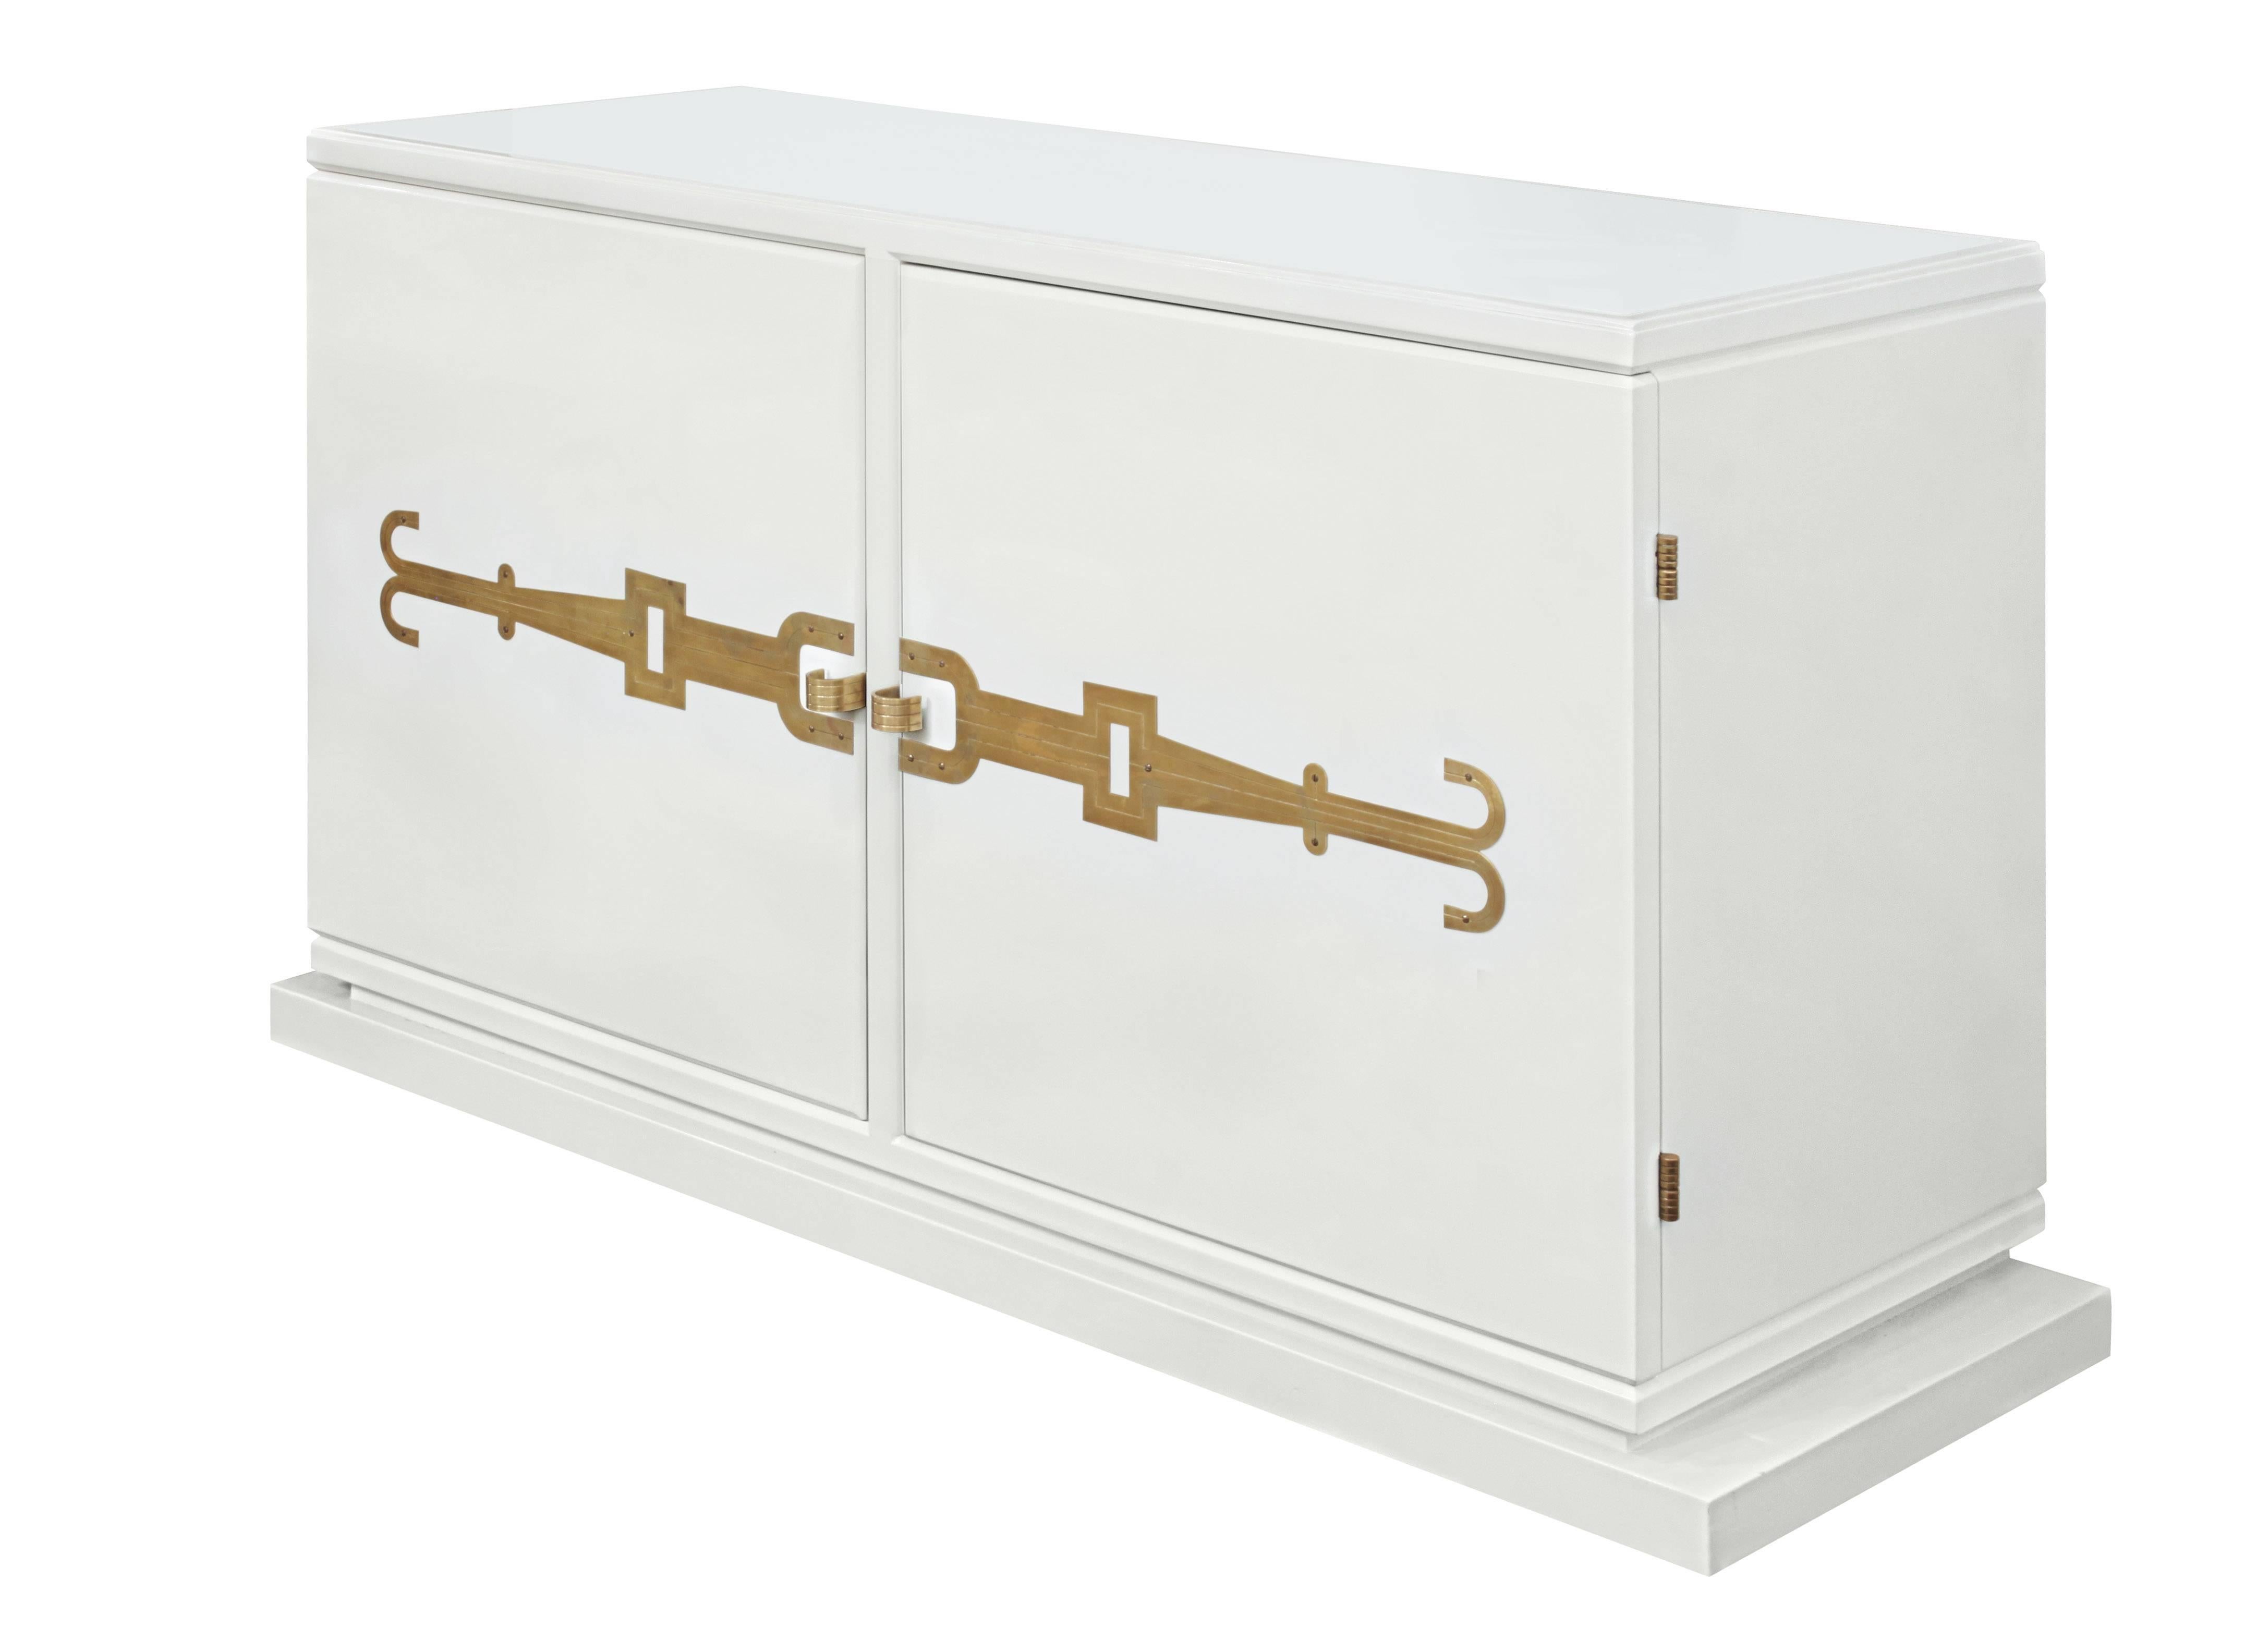 Fine and rare two-door credenza No. 140 in white lacquer with iconic brass hardware and inset white glass top by Tommi Parzinger for Parzinger Originals, American, 1950s.
 